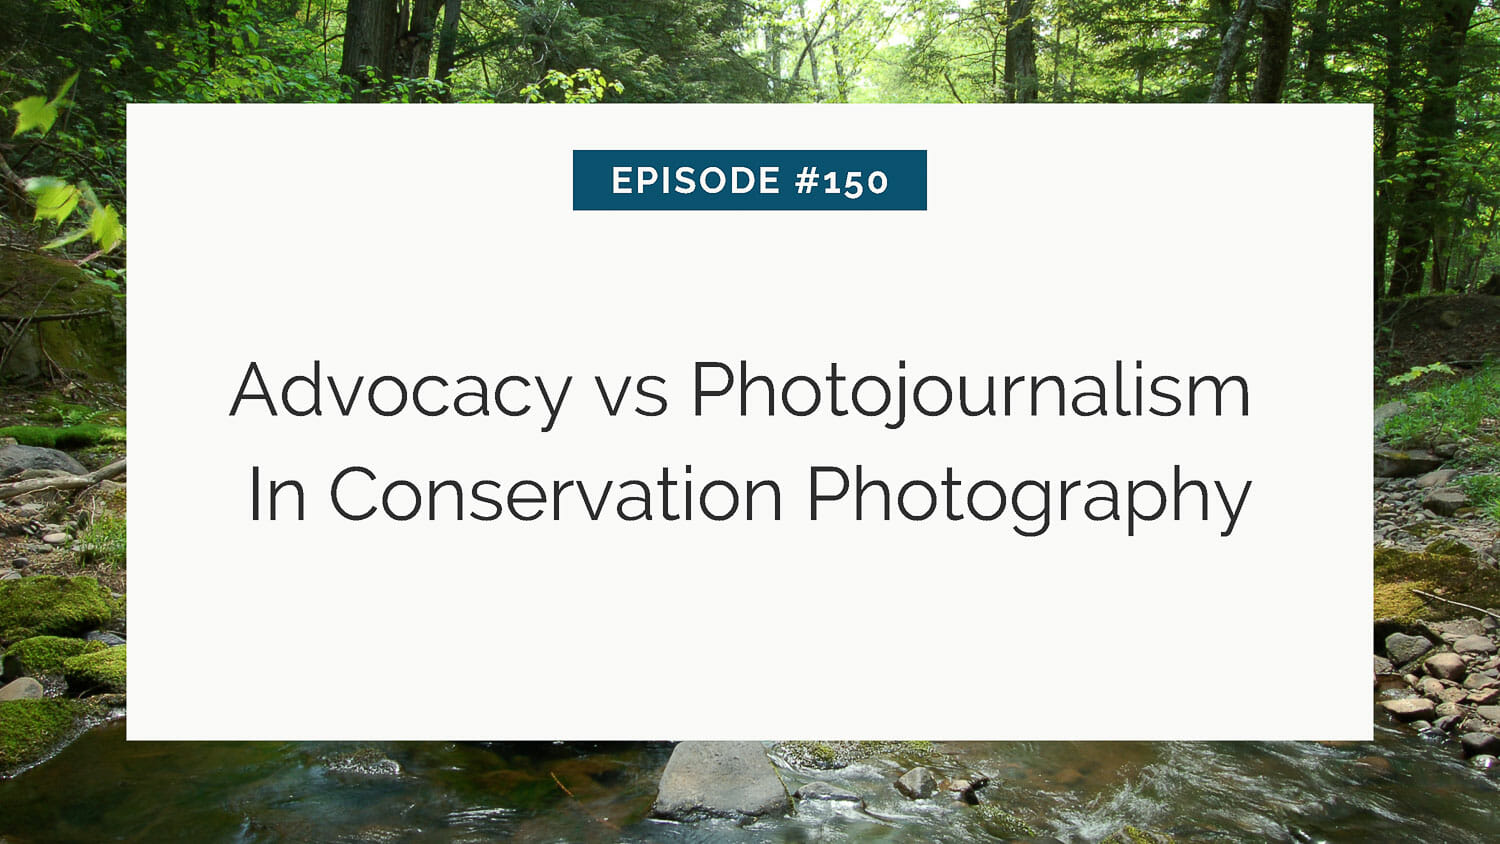 Slide with title "advocacy vs photojournalism in conservation photography" for episode #150.